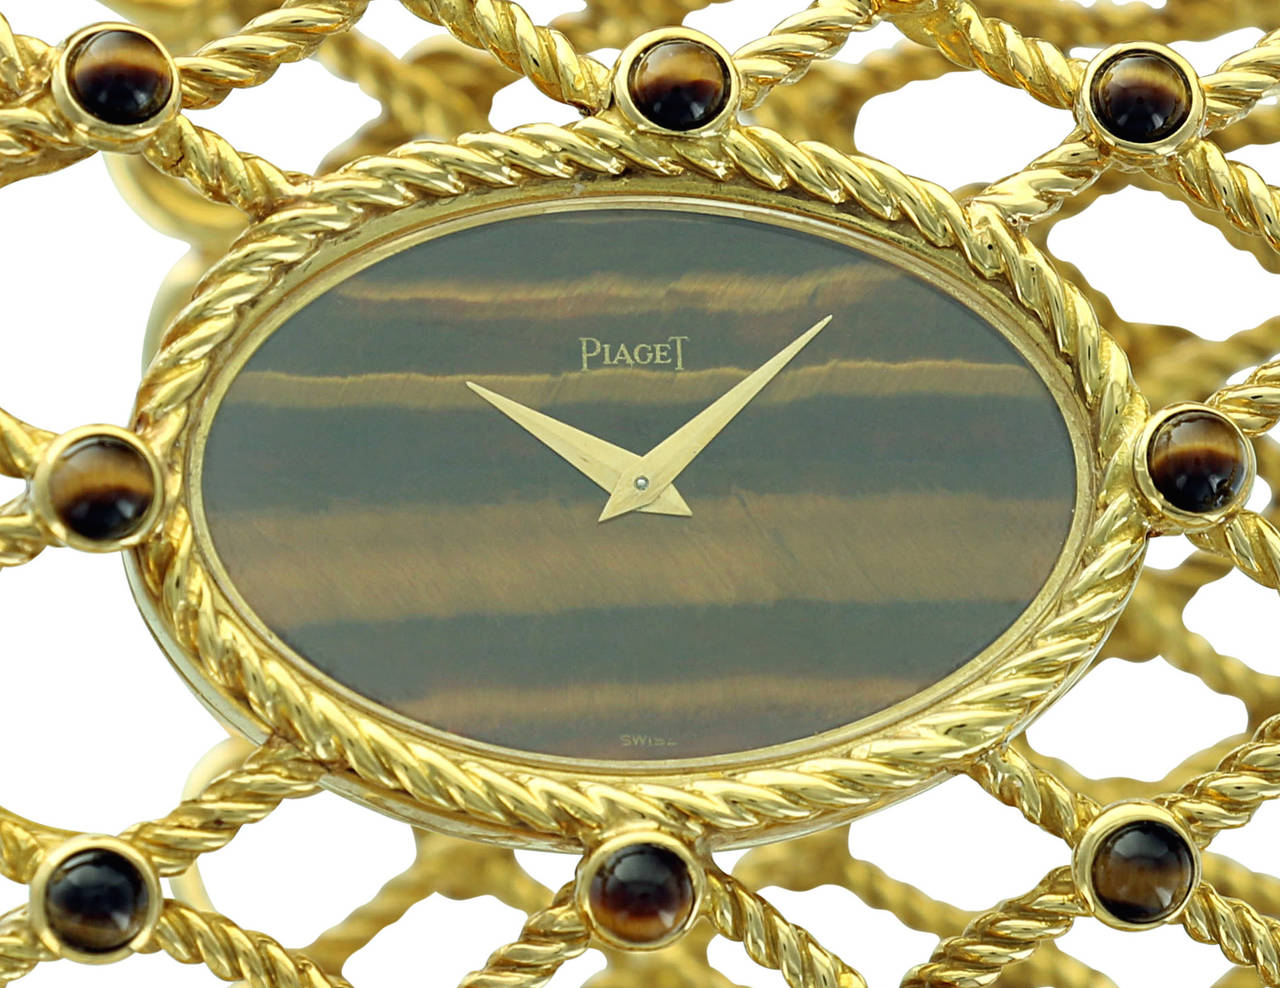 This truly spectacular ladies Piaget bangle watch features a wide yellow gold, intertwined rope bangle with round Tiger's Eye accents and a beautiful Tiger's Eye dial watch. Stylish, elegant and very wearable, this watch is both a fine piece of